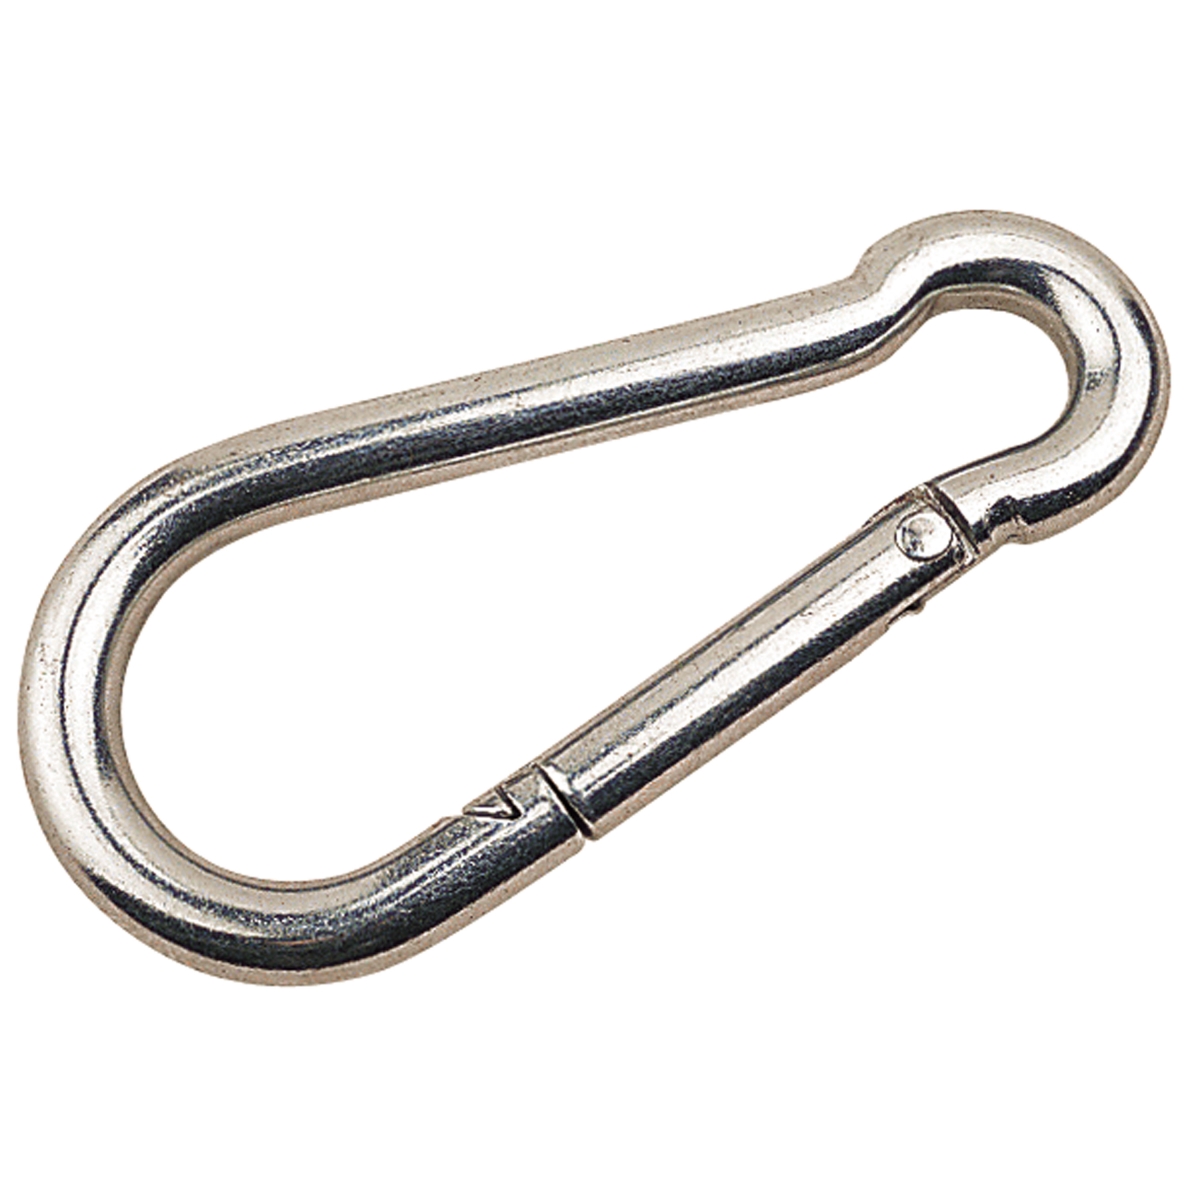 Picture of Sea-Dog 3004.6062 4-0.68 in. 151620-1 Snap Hook, Silver